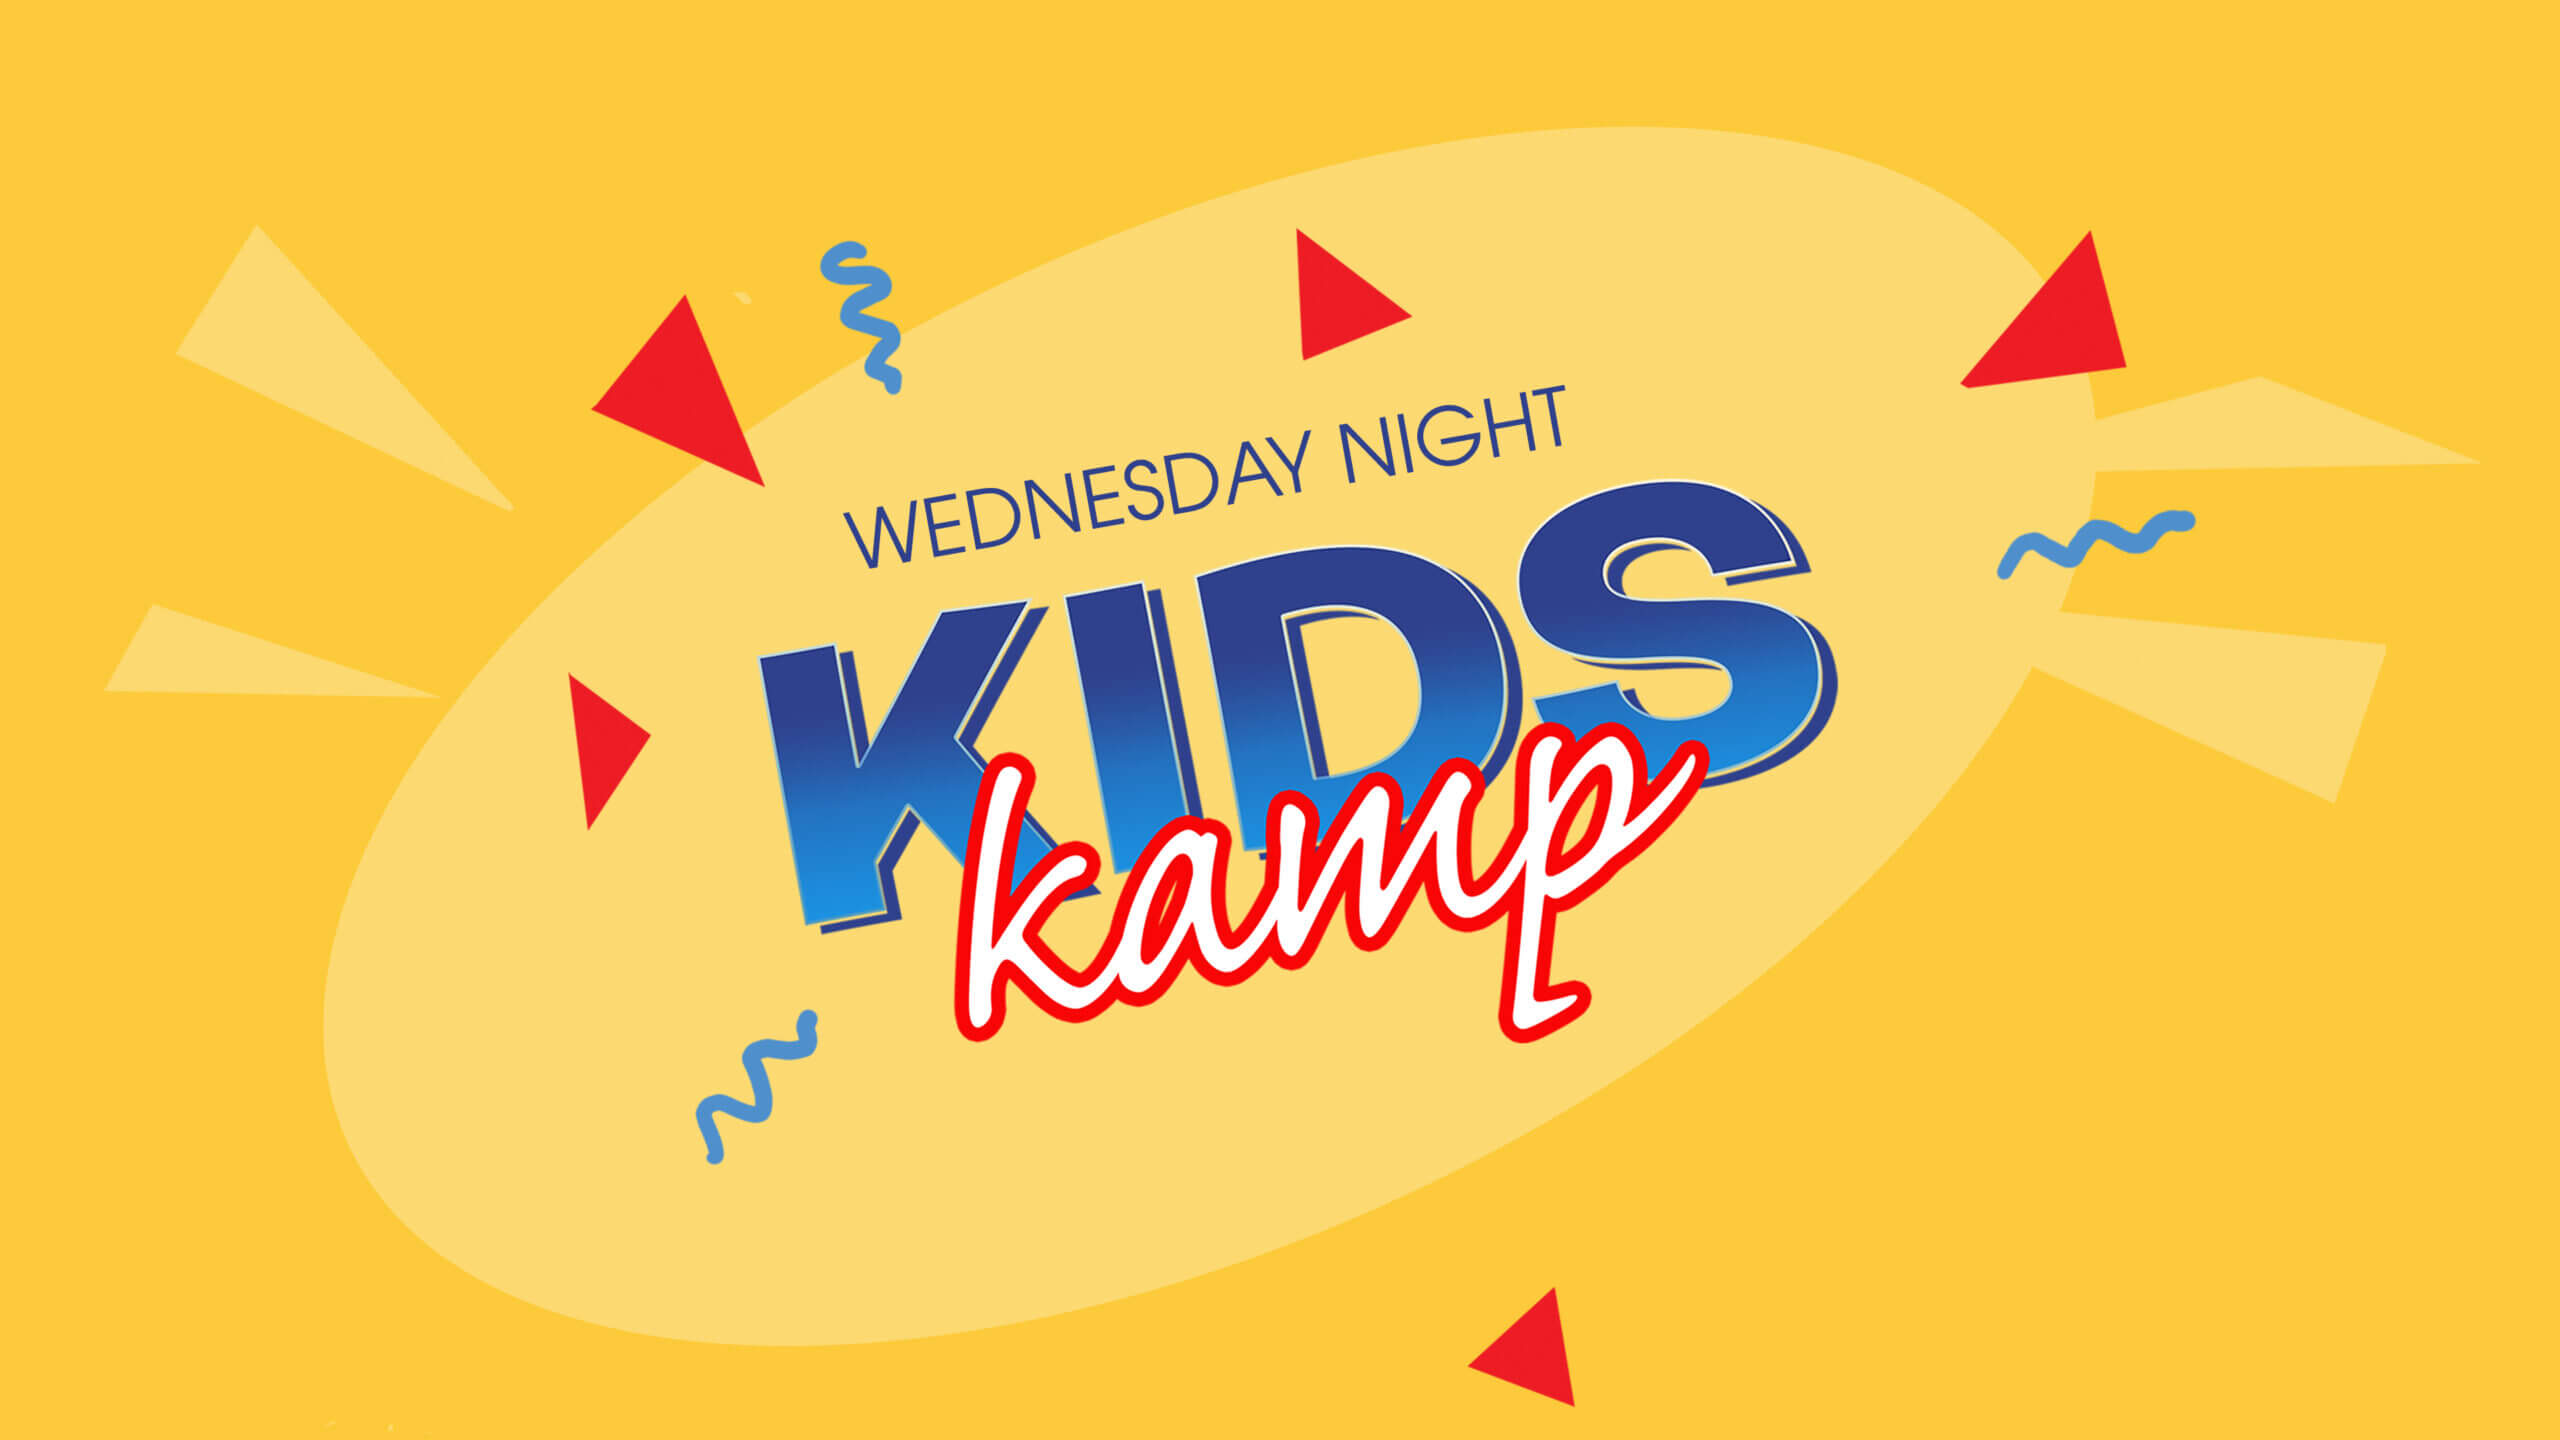 Wednesday Night church Kids Kamp for kids and families